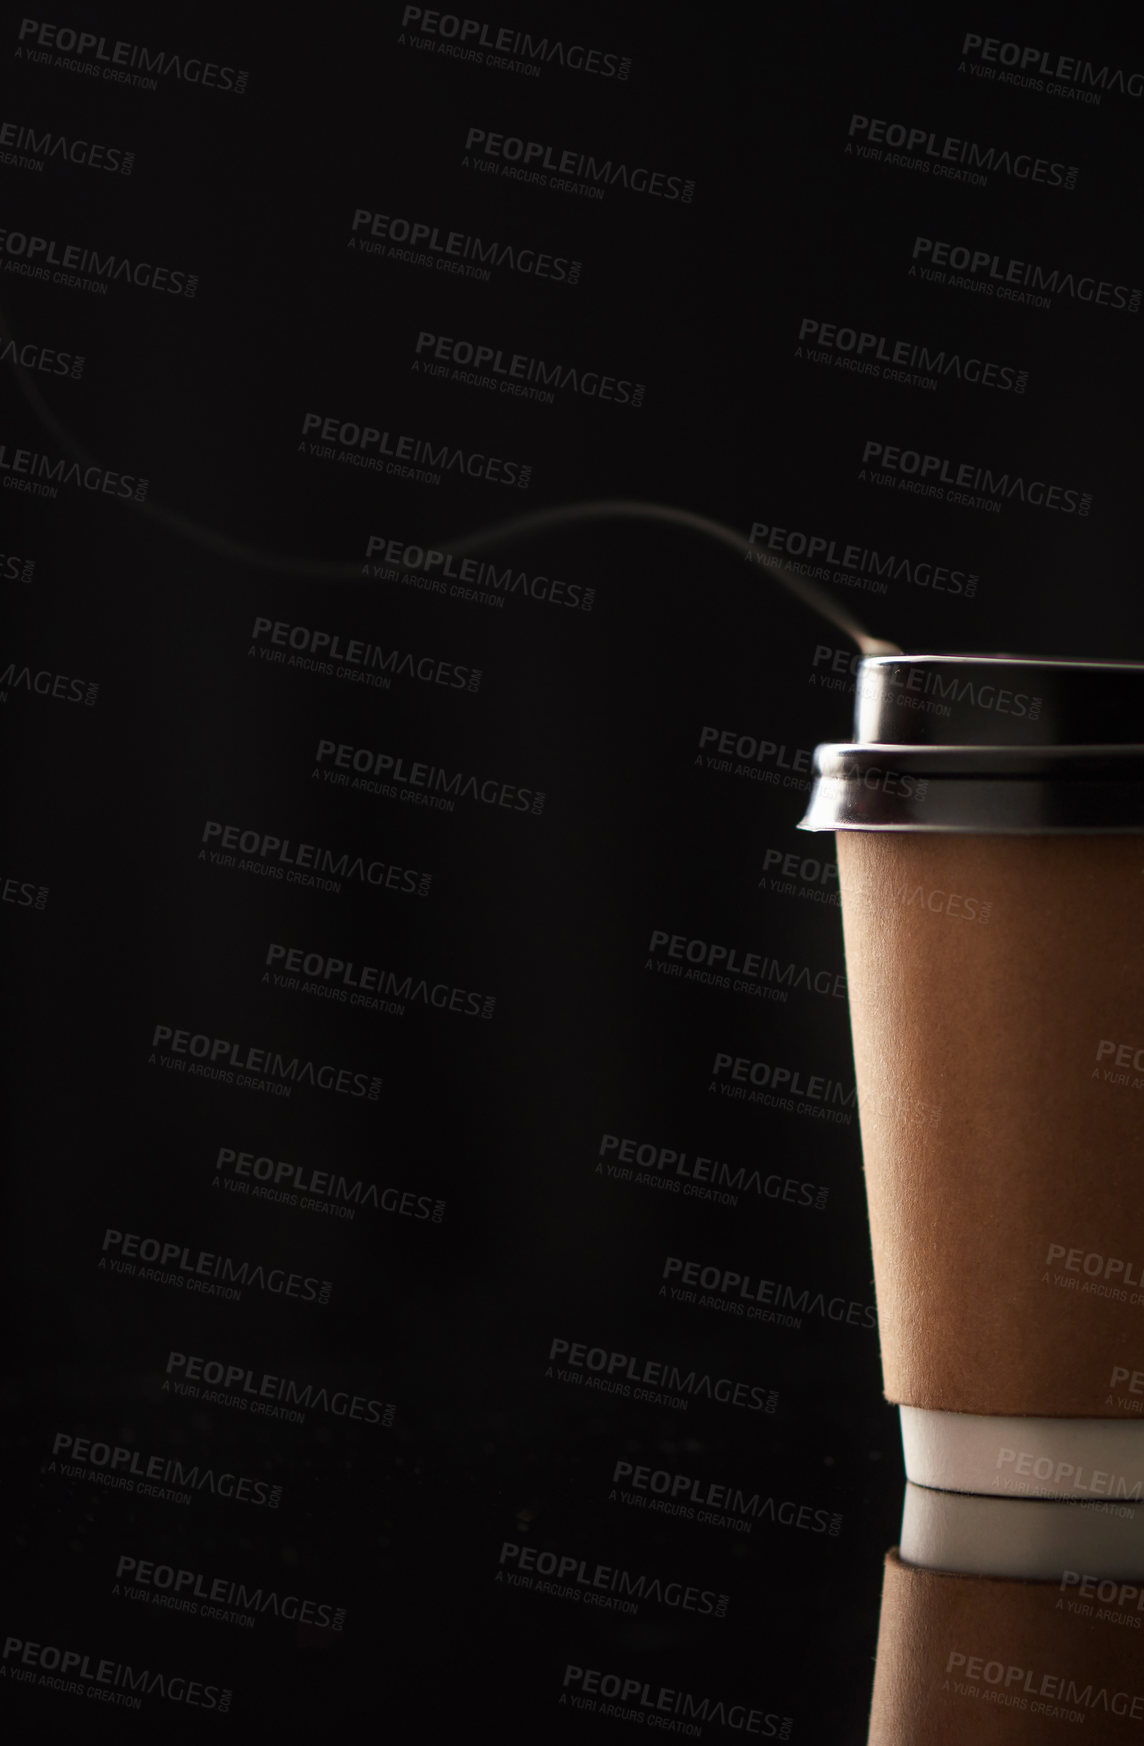 Buy stock photo Closeup shot of steam rising from a paper cup filled with a warm beverage